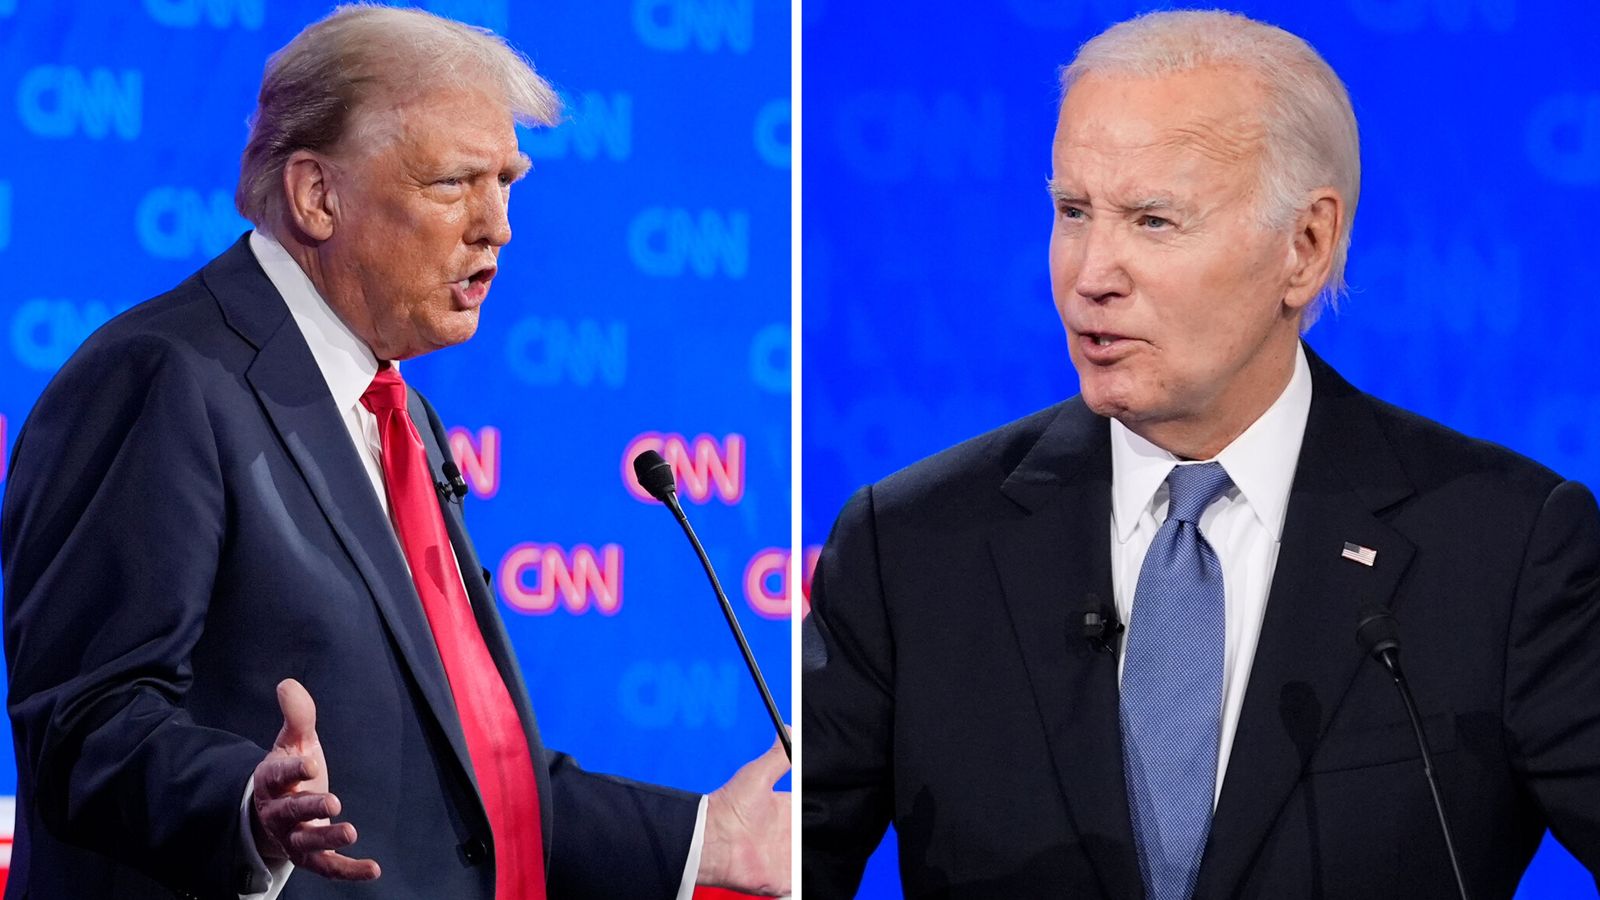 'Unmitigated disaster' for Biden in TV debate with Trump - as he faces calls from Democrats to step aside